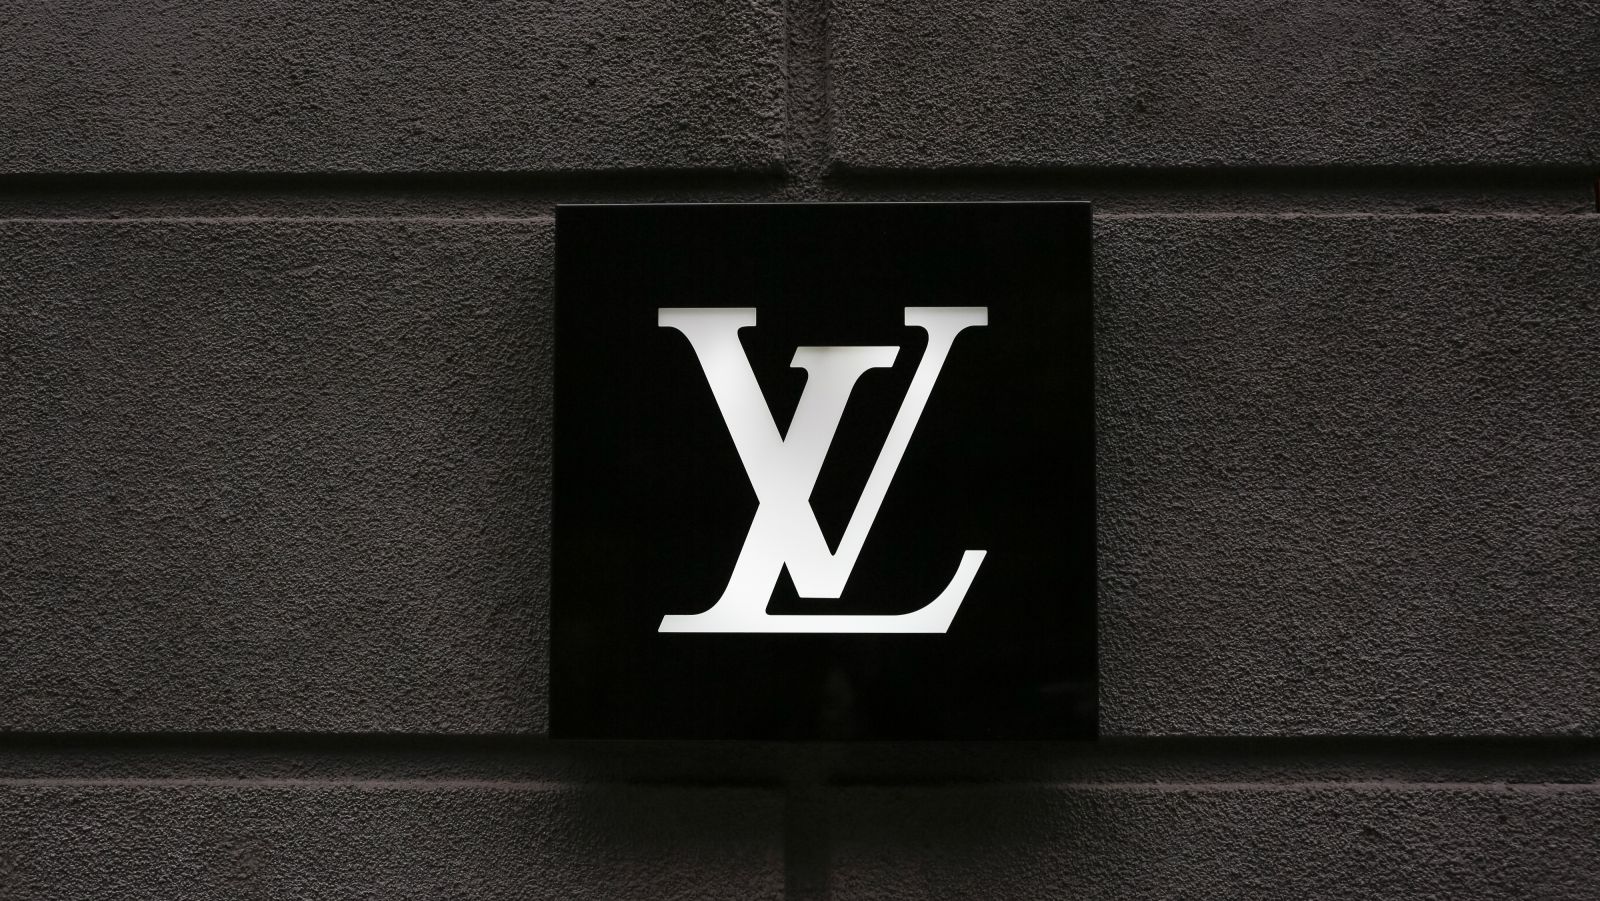 Louis Vuitton sues Korean restaurant for using the brand name to sell chicken : Luxurylaunches